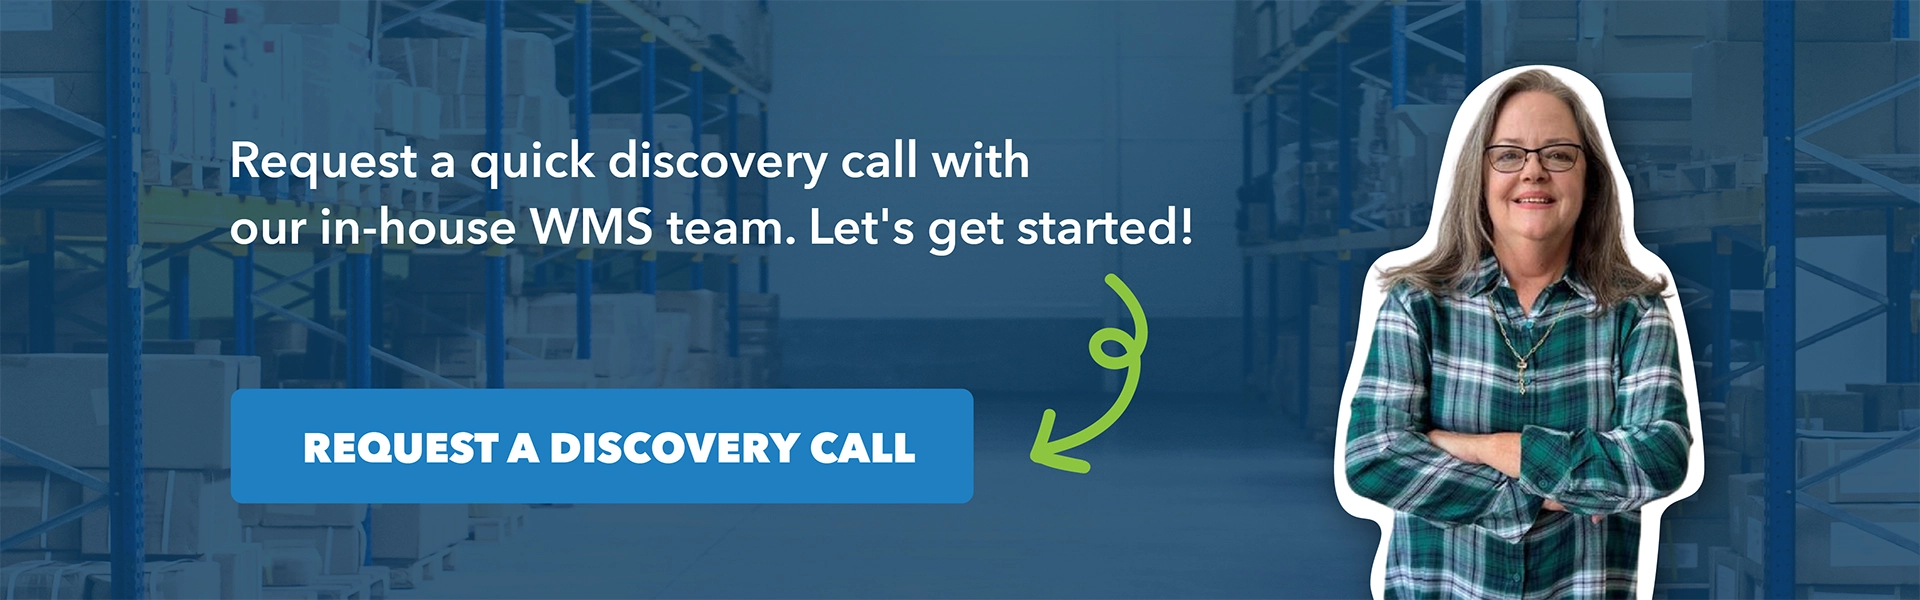 request a discovery call